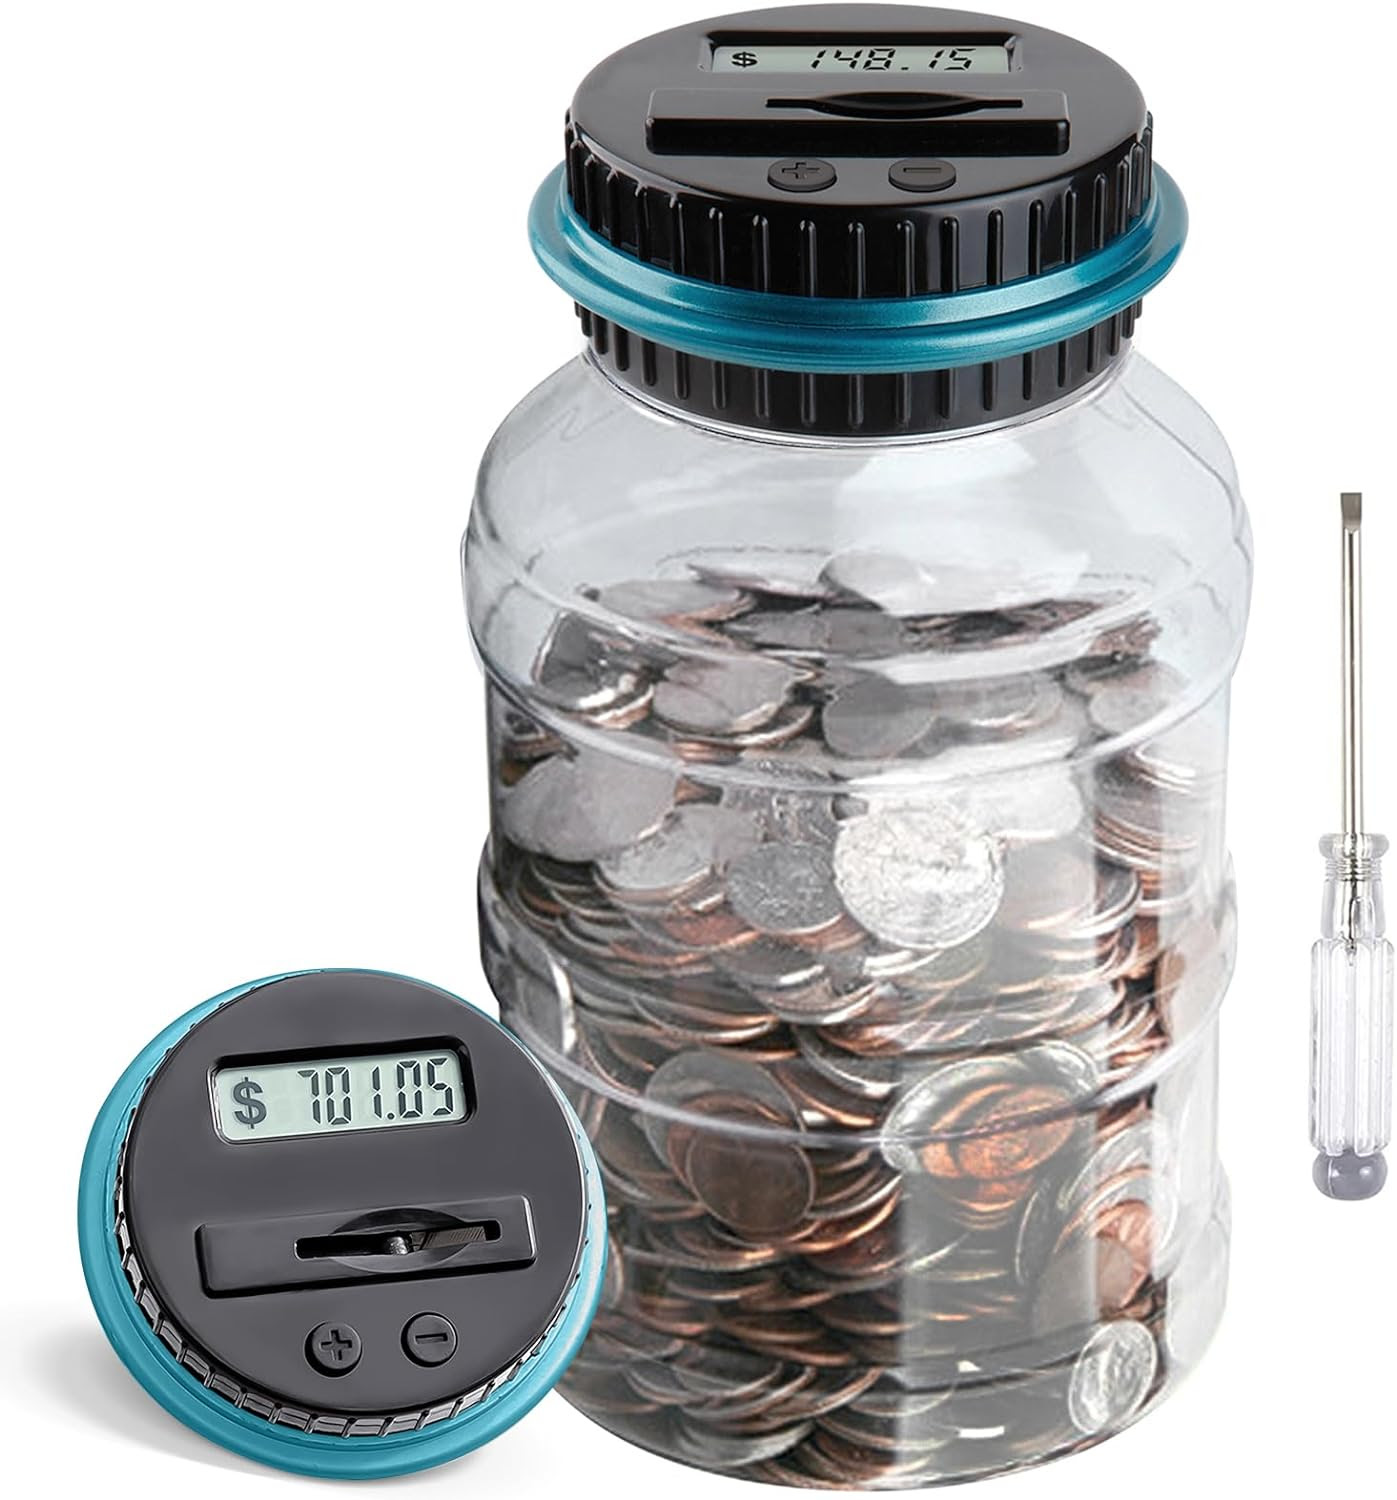 Digital Coin Counting Bank with LCD Counter, 1.8L Capacity Coin Bank Money Jar for Kids and Adults, Designed for All US Coins (Blue)                               